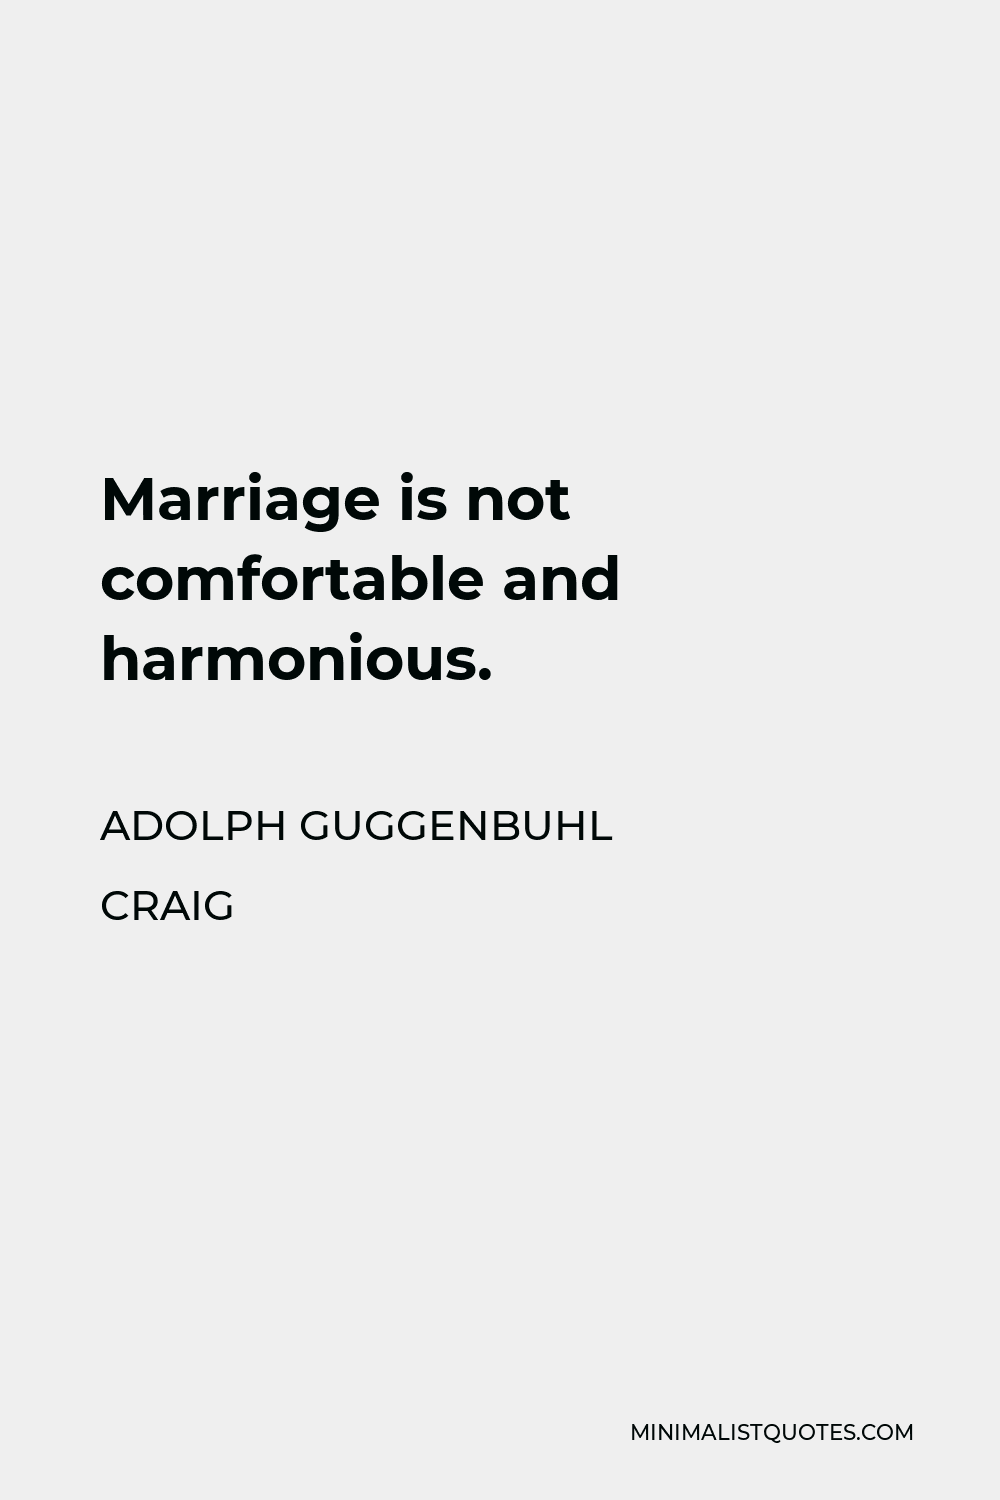 Adolph Guggenbuhl Craig Quote - Marriage is not comfortable and harmonious.